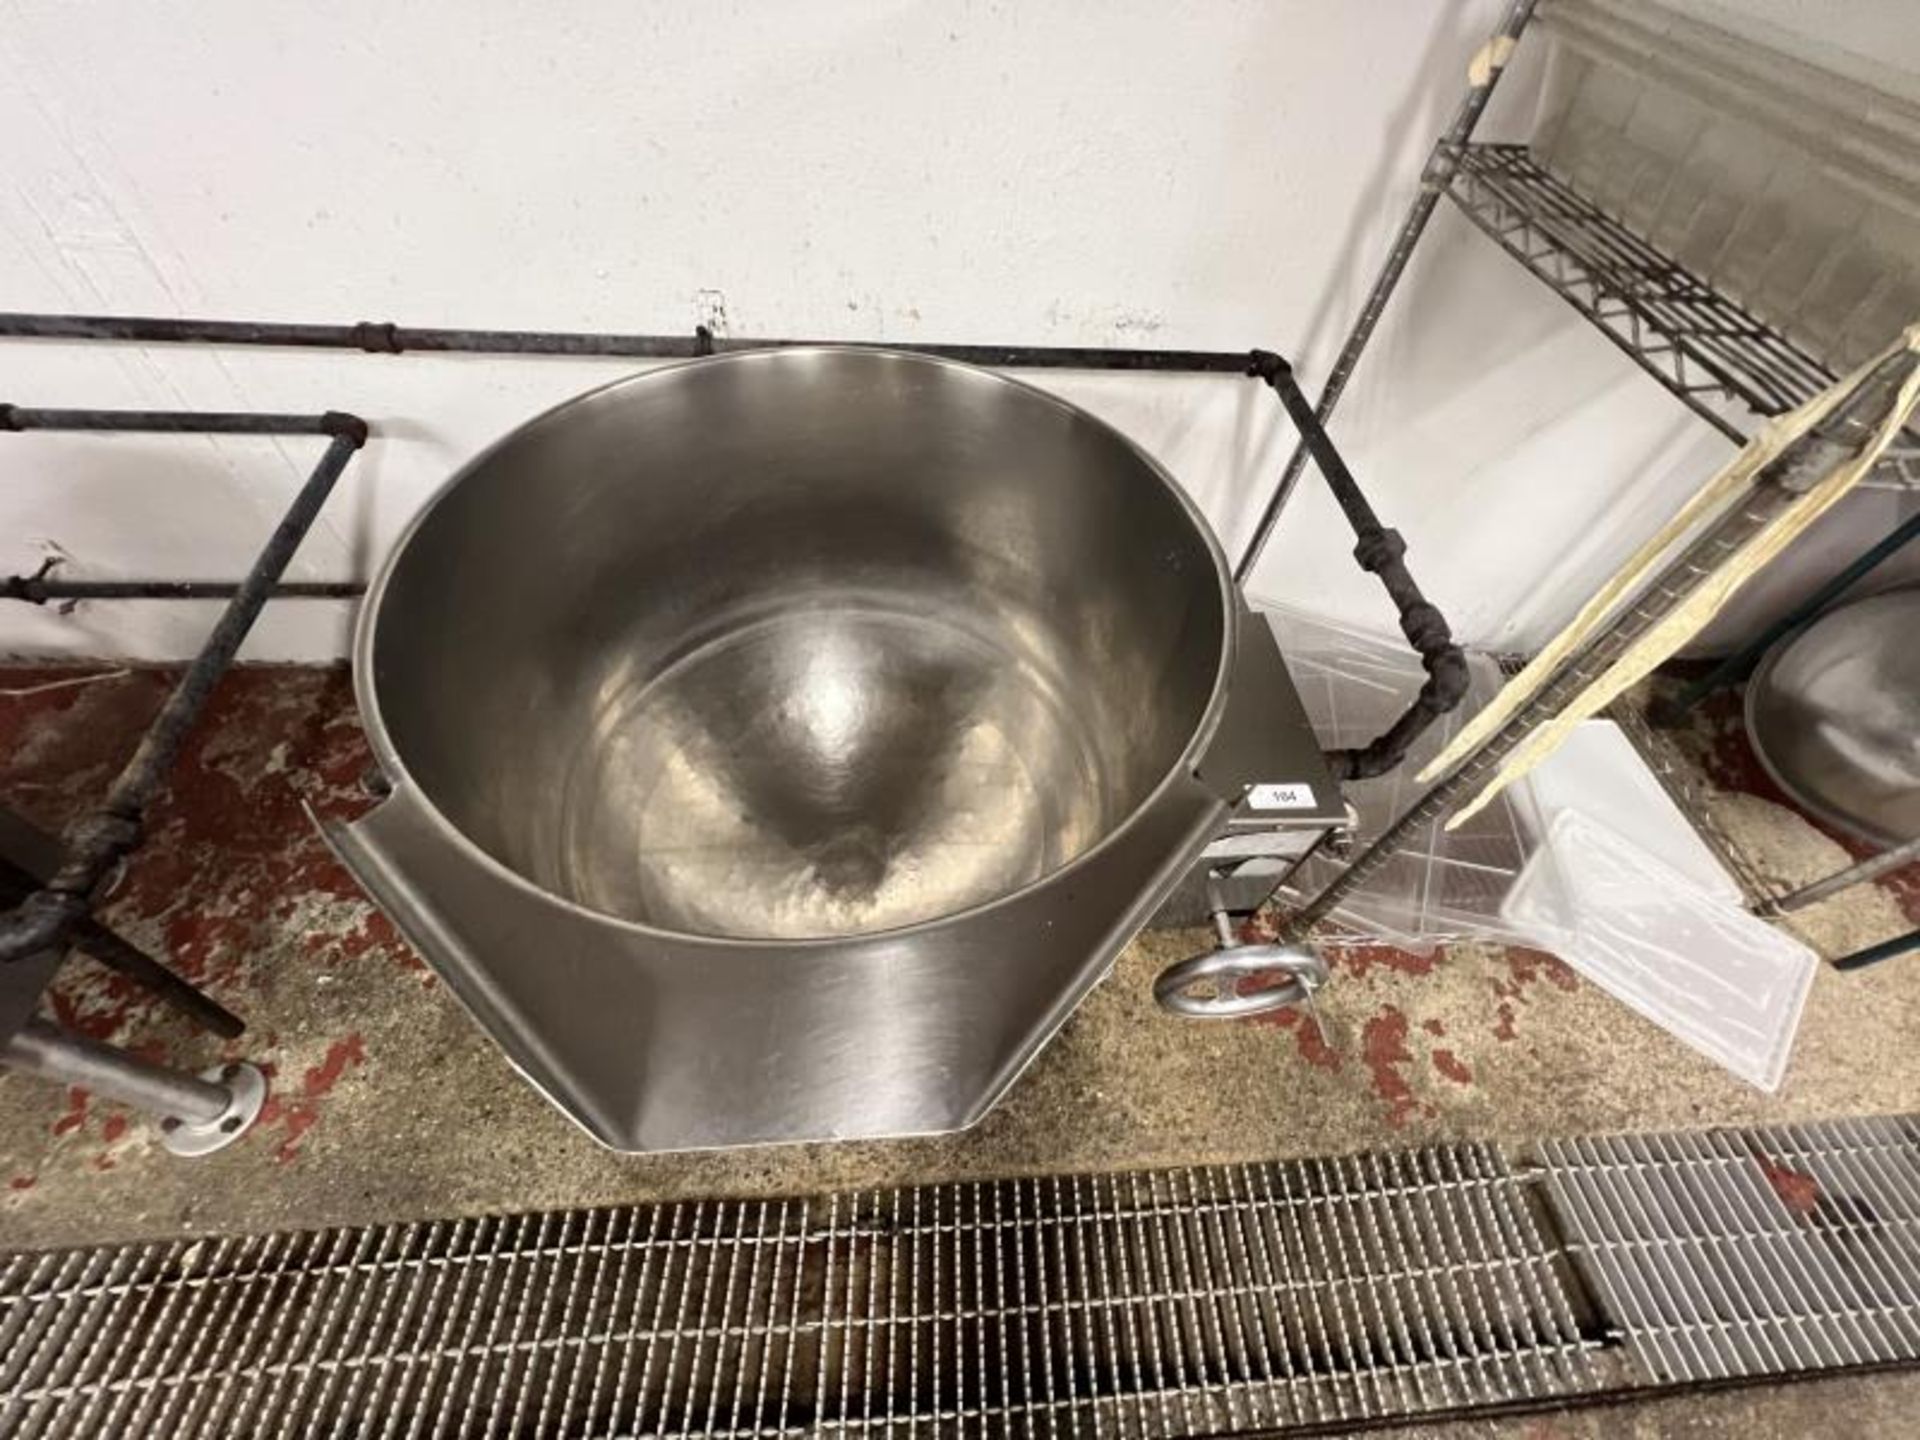 Stainless Steel Steam Kettle 27" Diameter Located in Basement Kitchen - Image 3 of 4